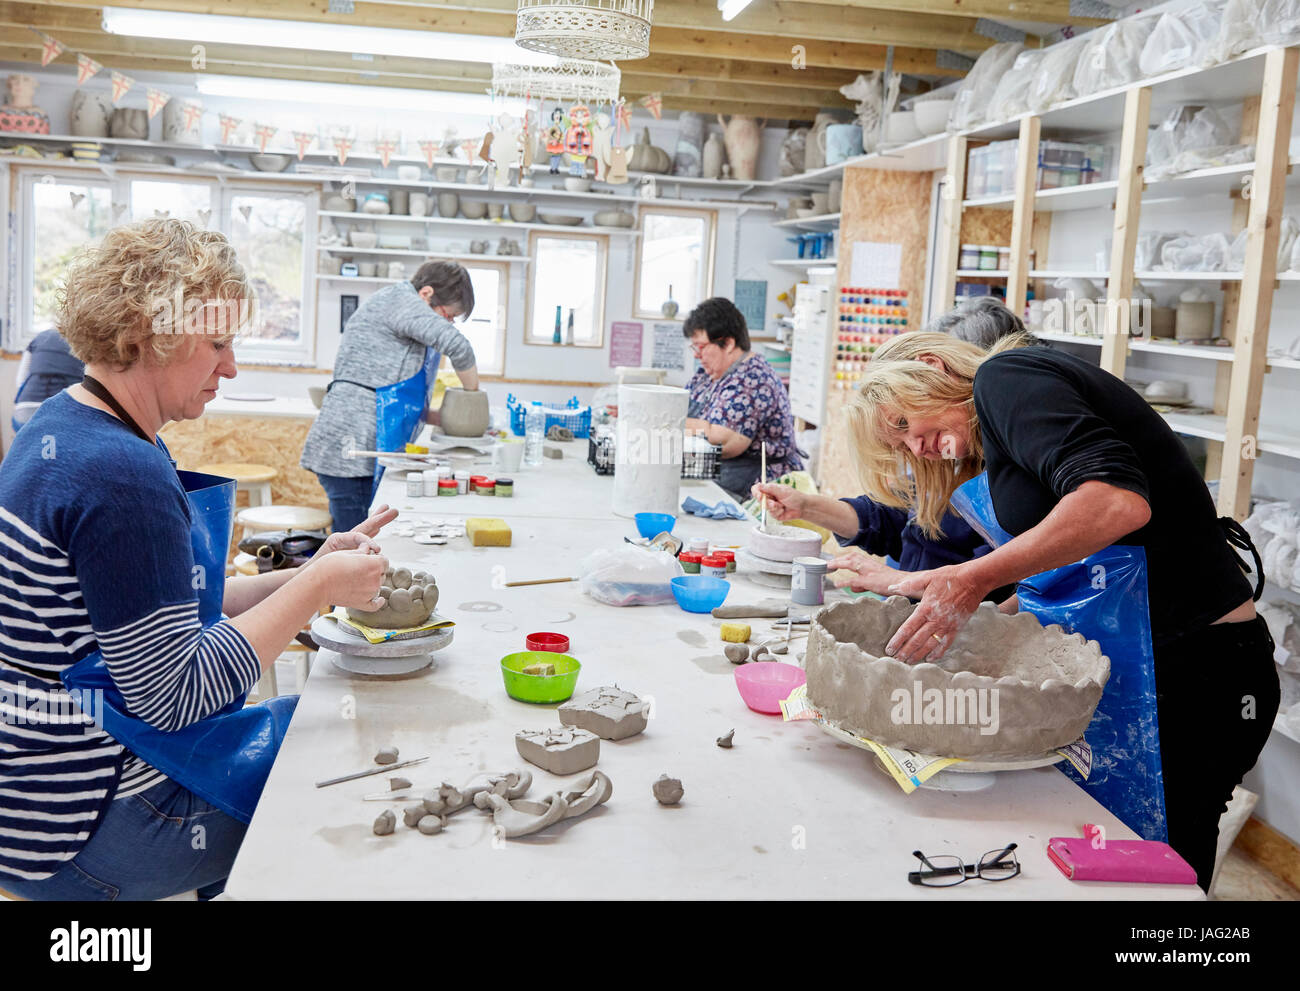 Five people, women in a pottery studio, working on handbuilding clay objects. Stock Photo